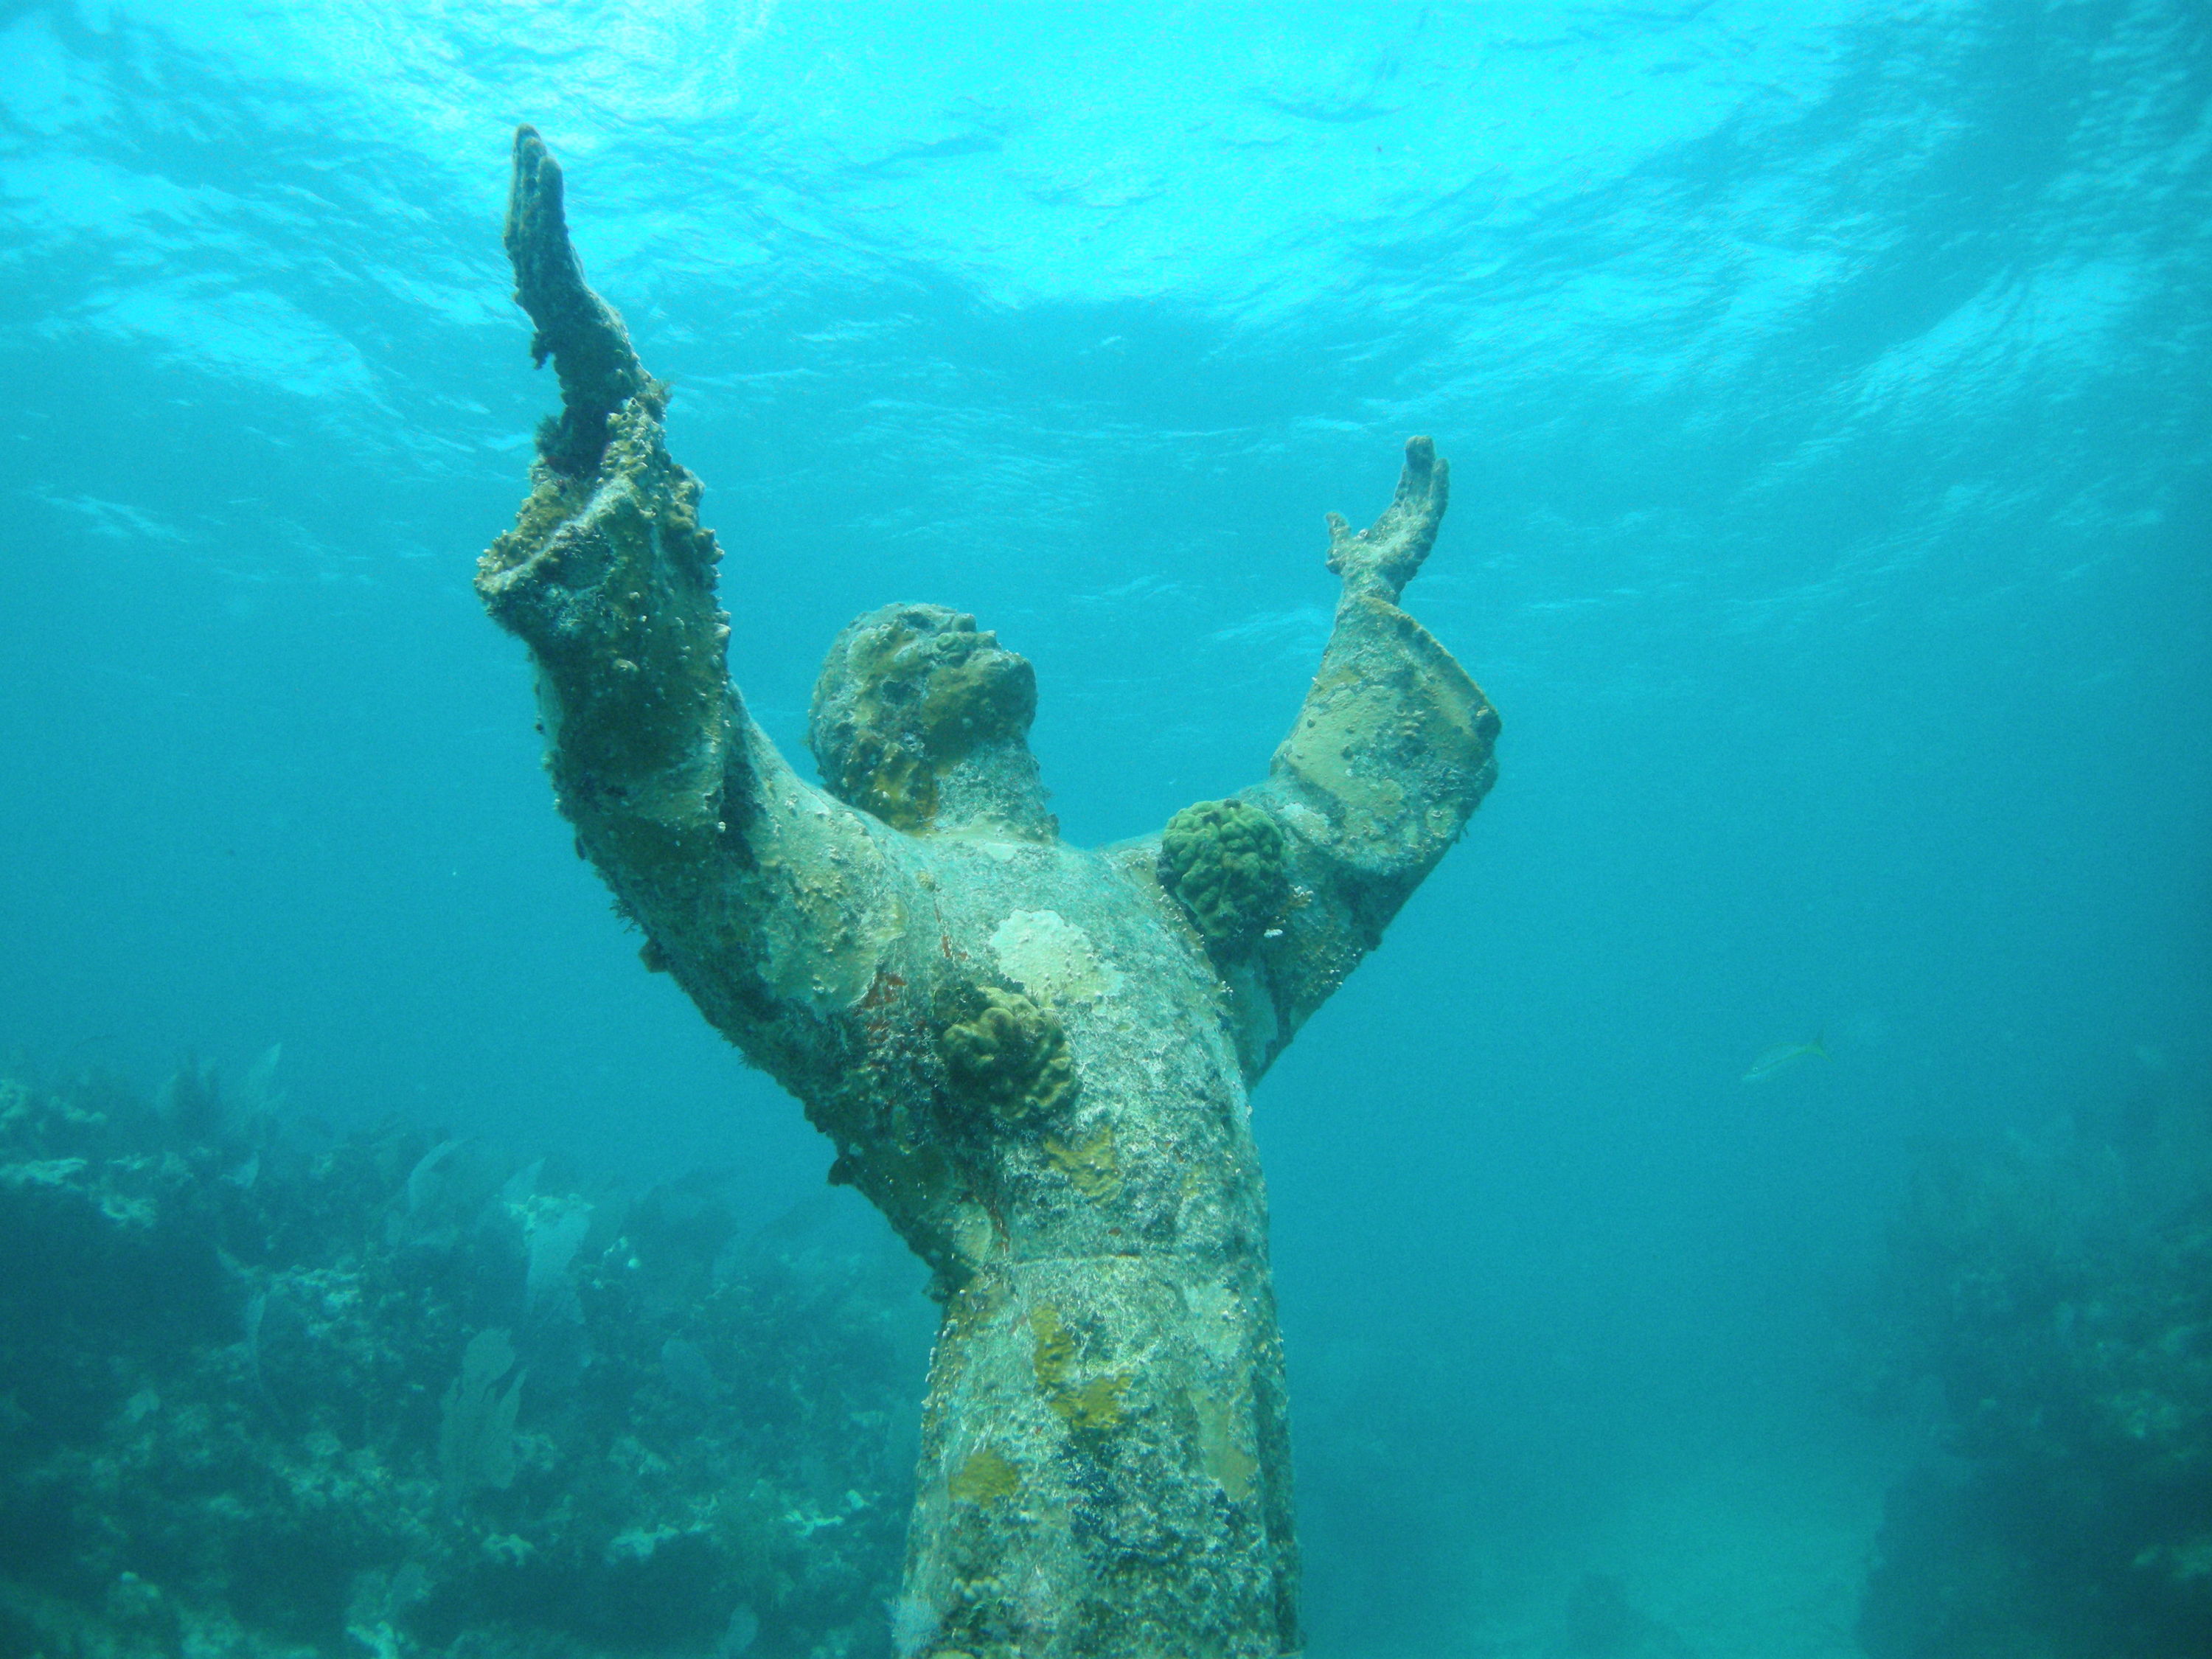 Christ of the abyss in Key Largo